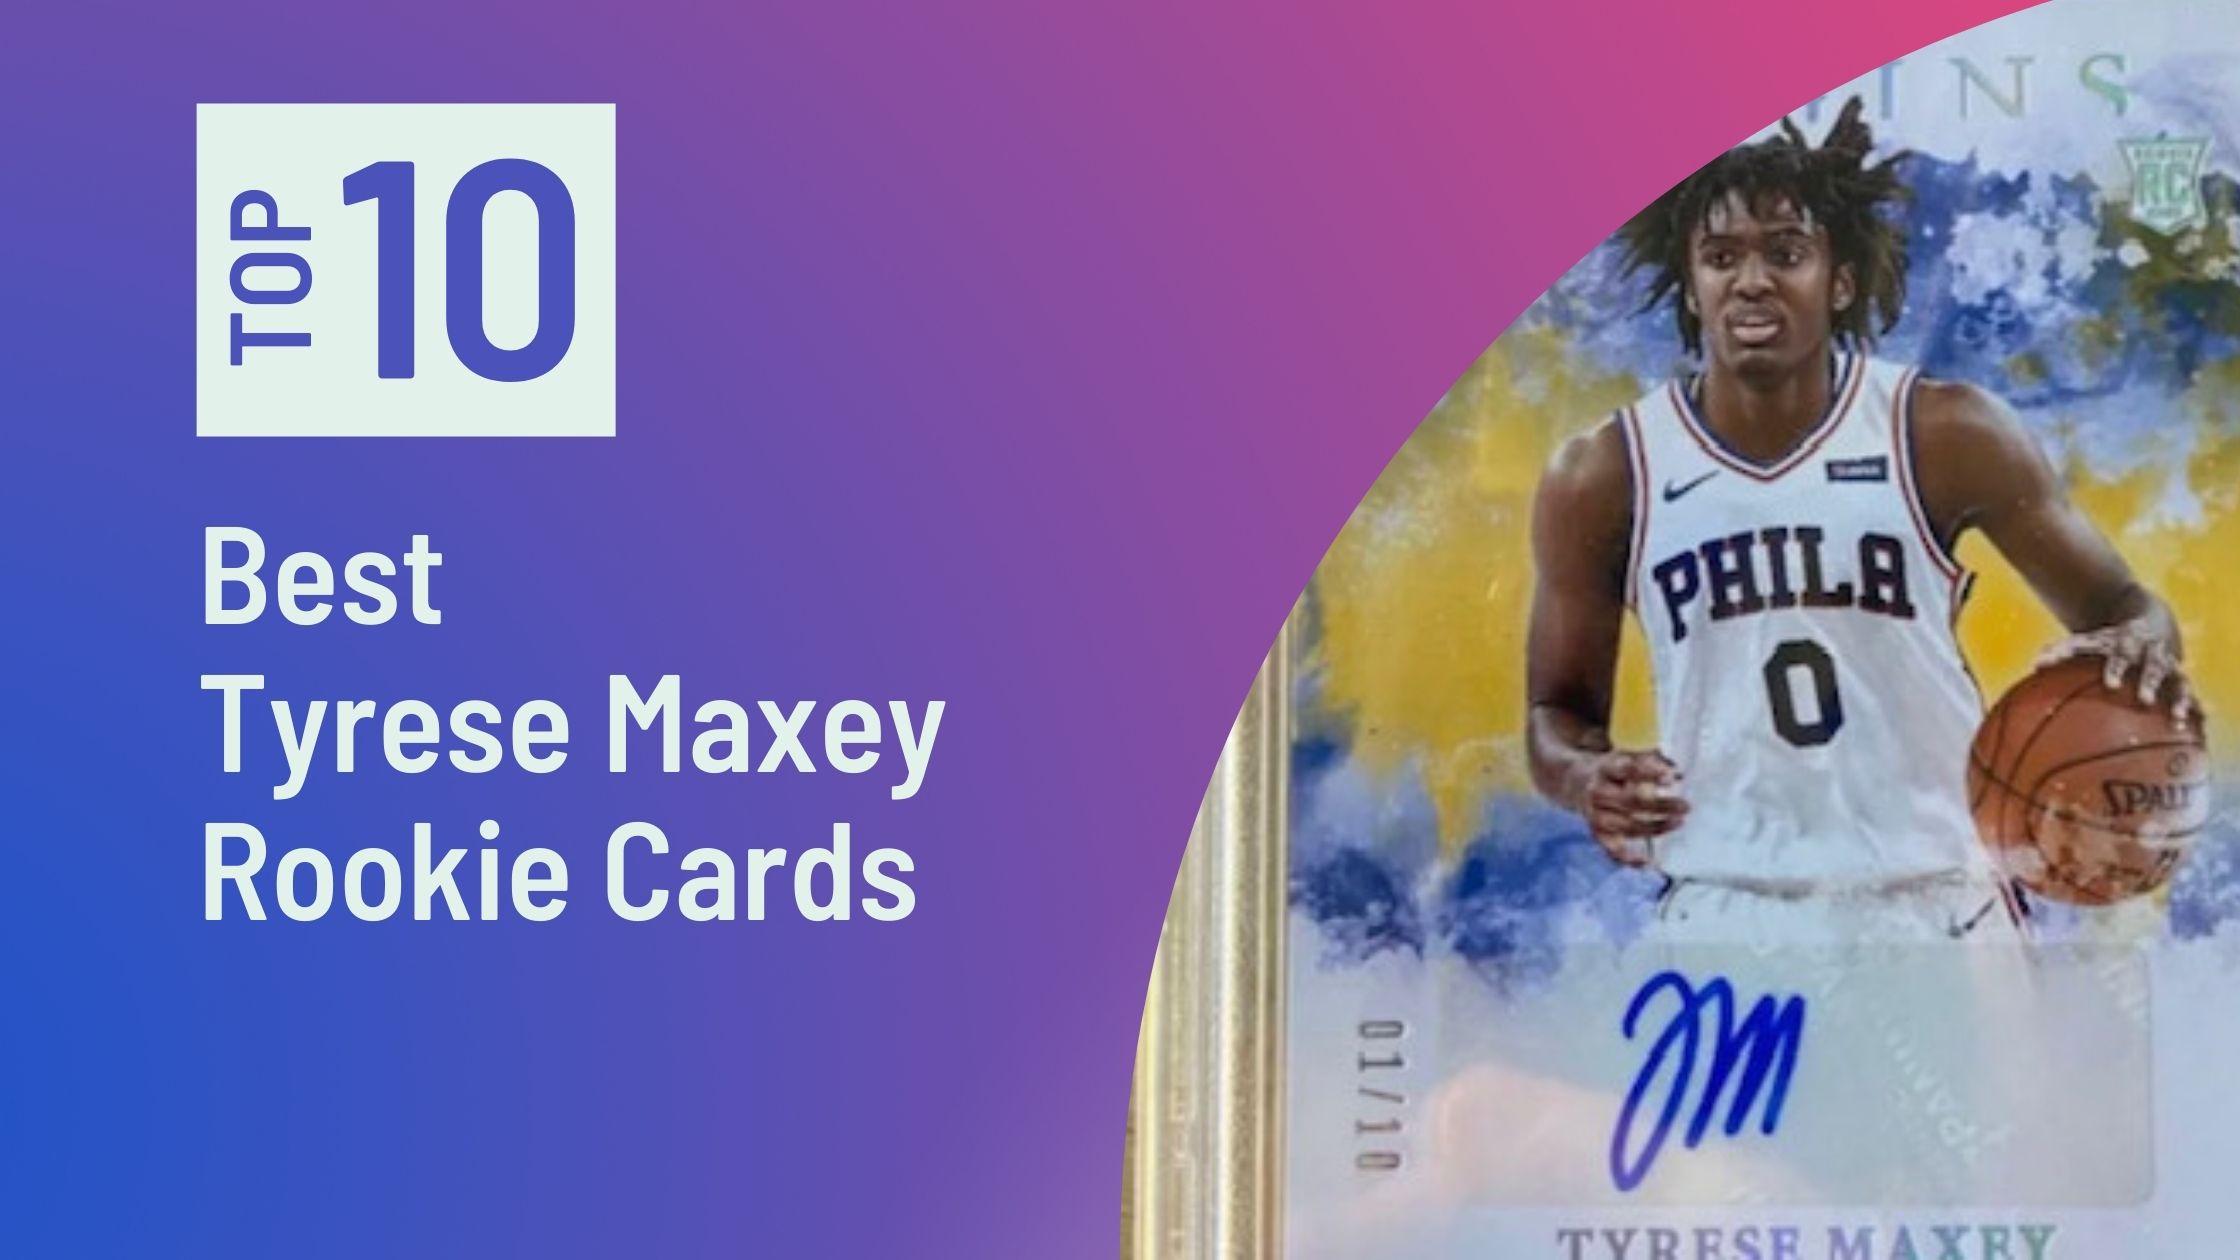 Featured Image for the Best Tyrese Maxey Rookie Cards blog post